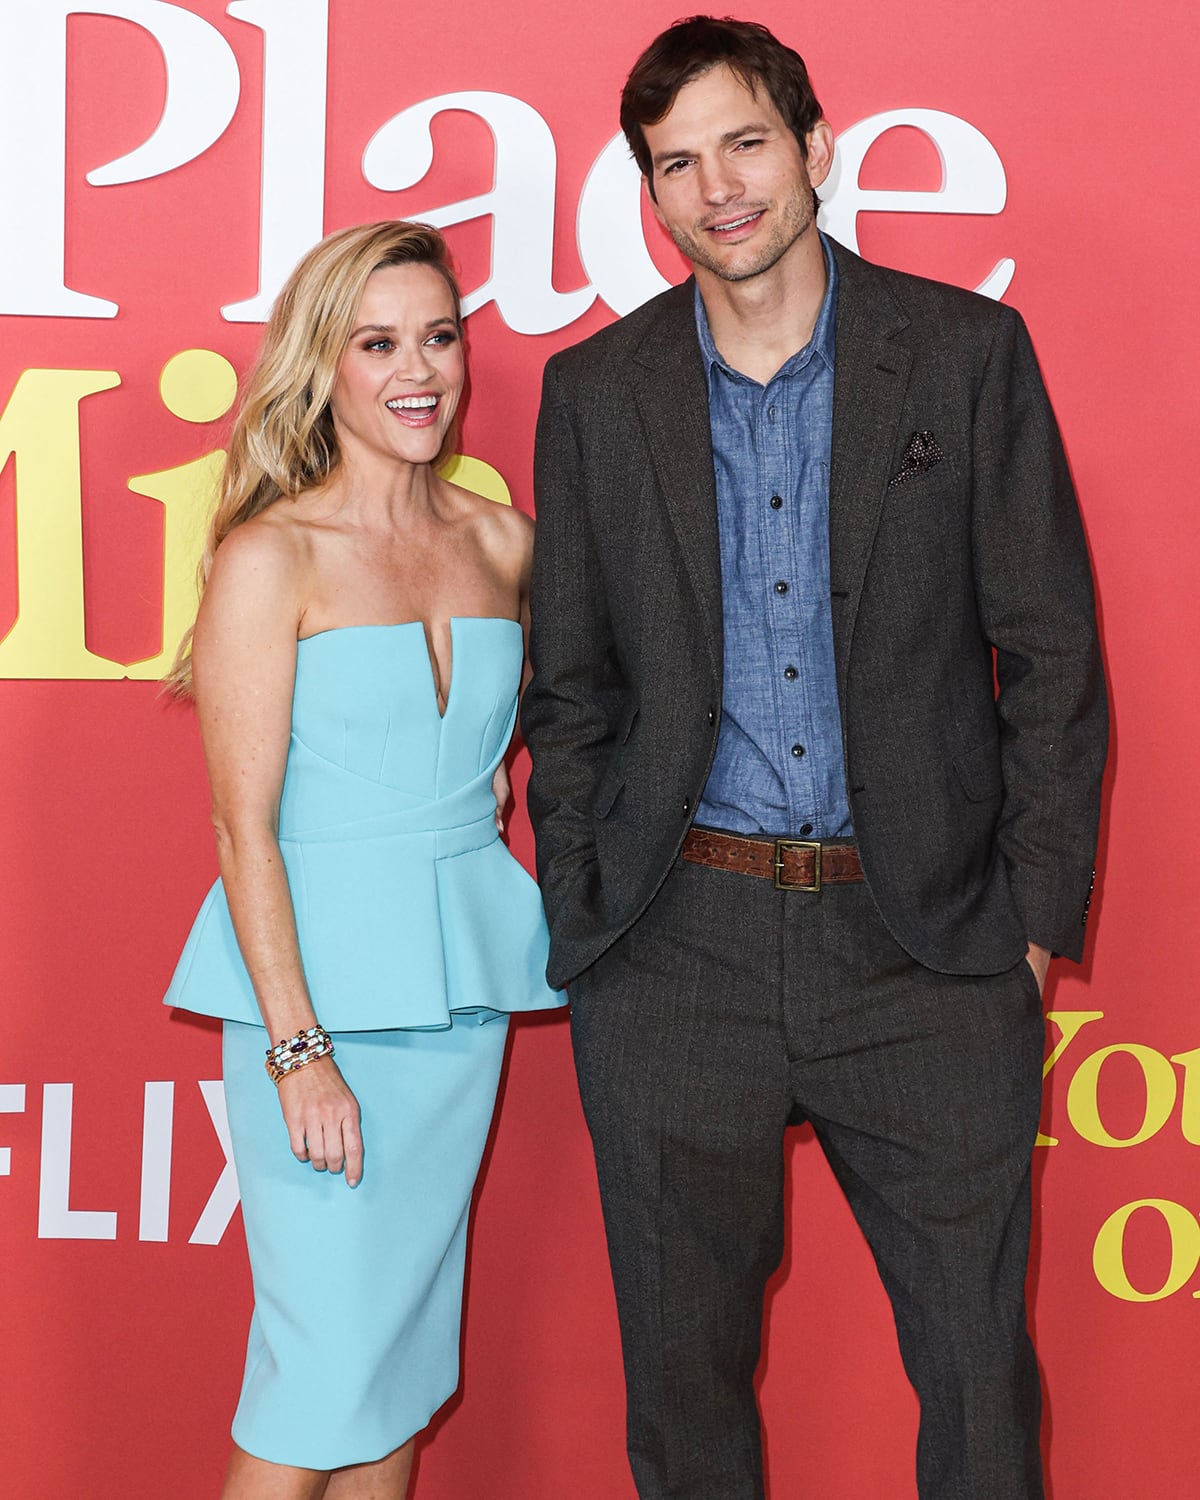 Ashton Kutcher revealed he has always wanted to work with Reese Witherspoon